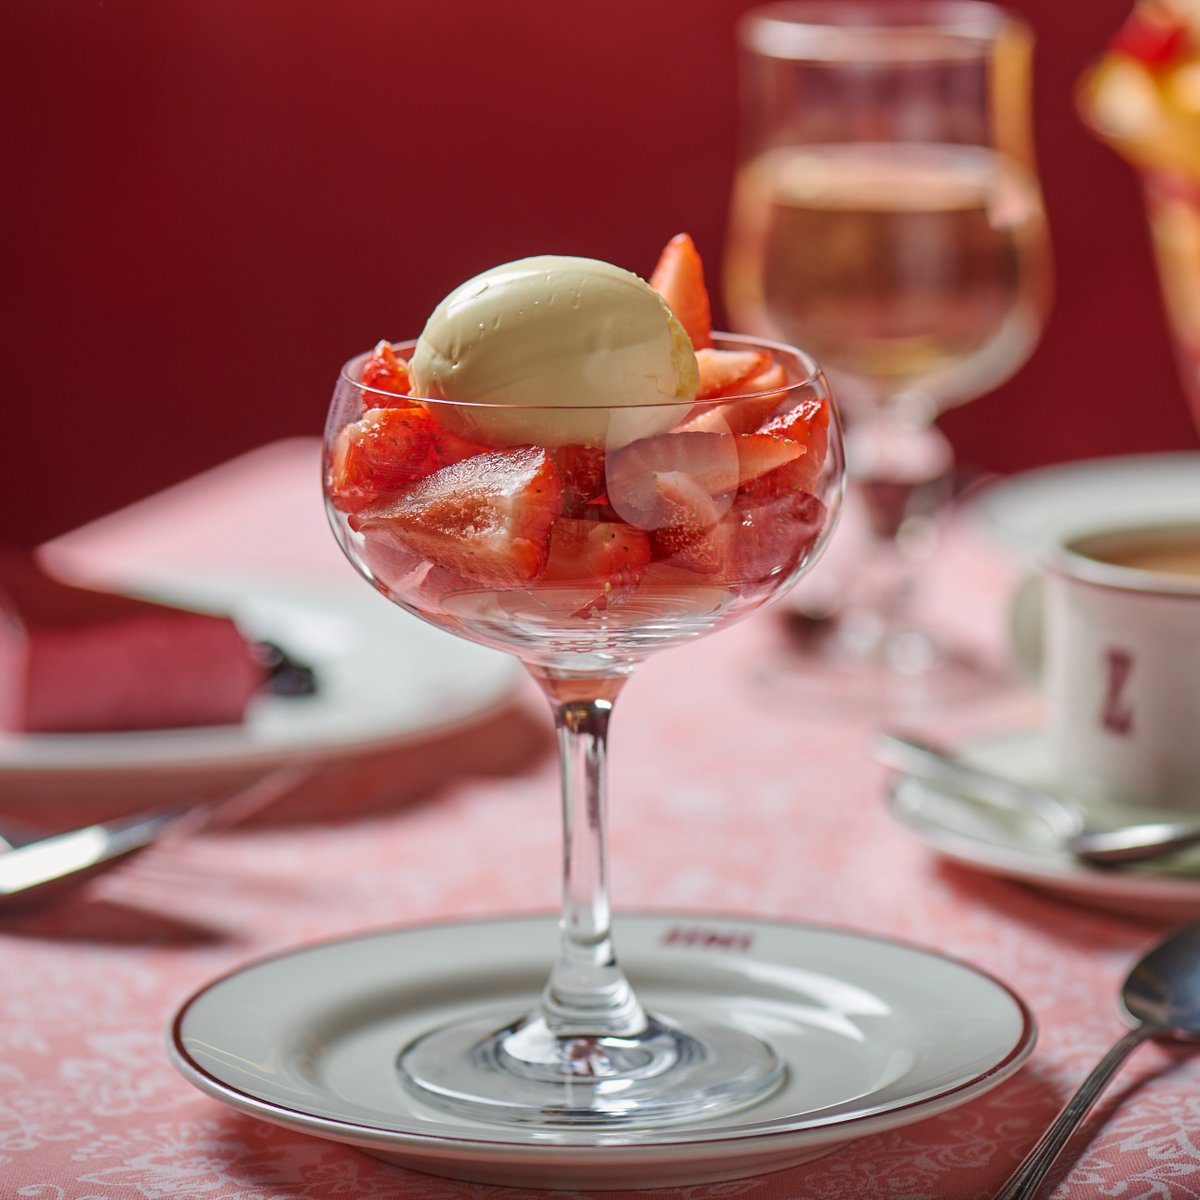 English Strawberries and Clotted Cream